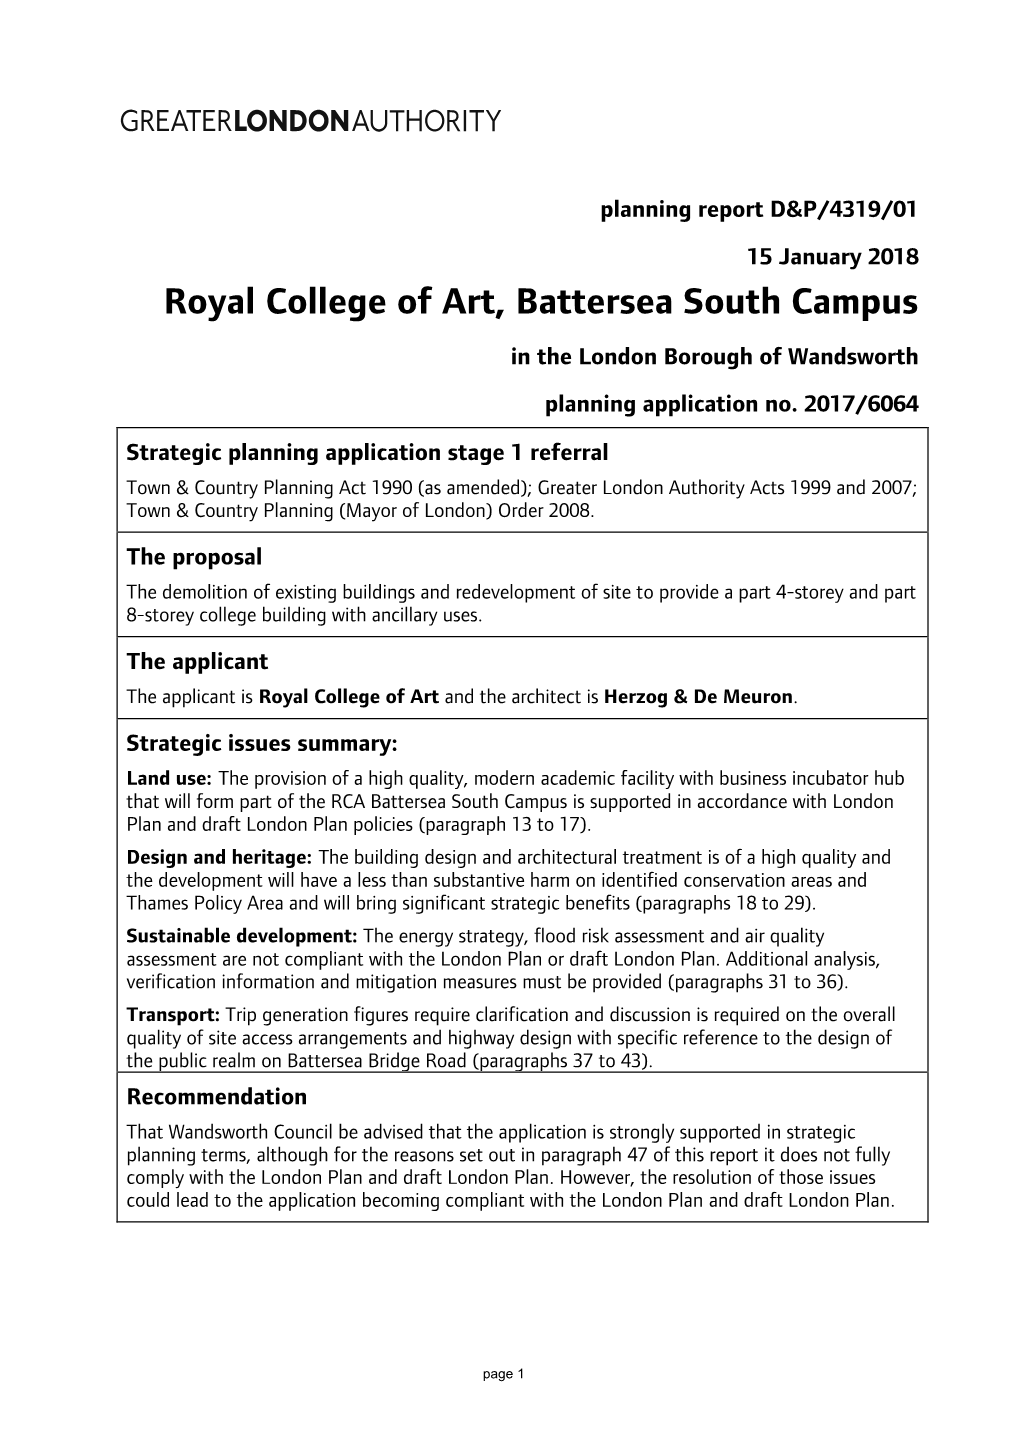 Royal College of Art, Battersea South Campus in the London Borough of Wandsworth Planning Application No